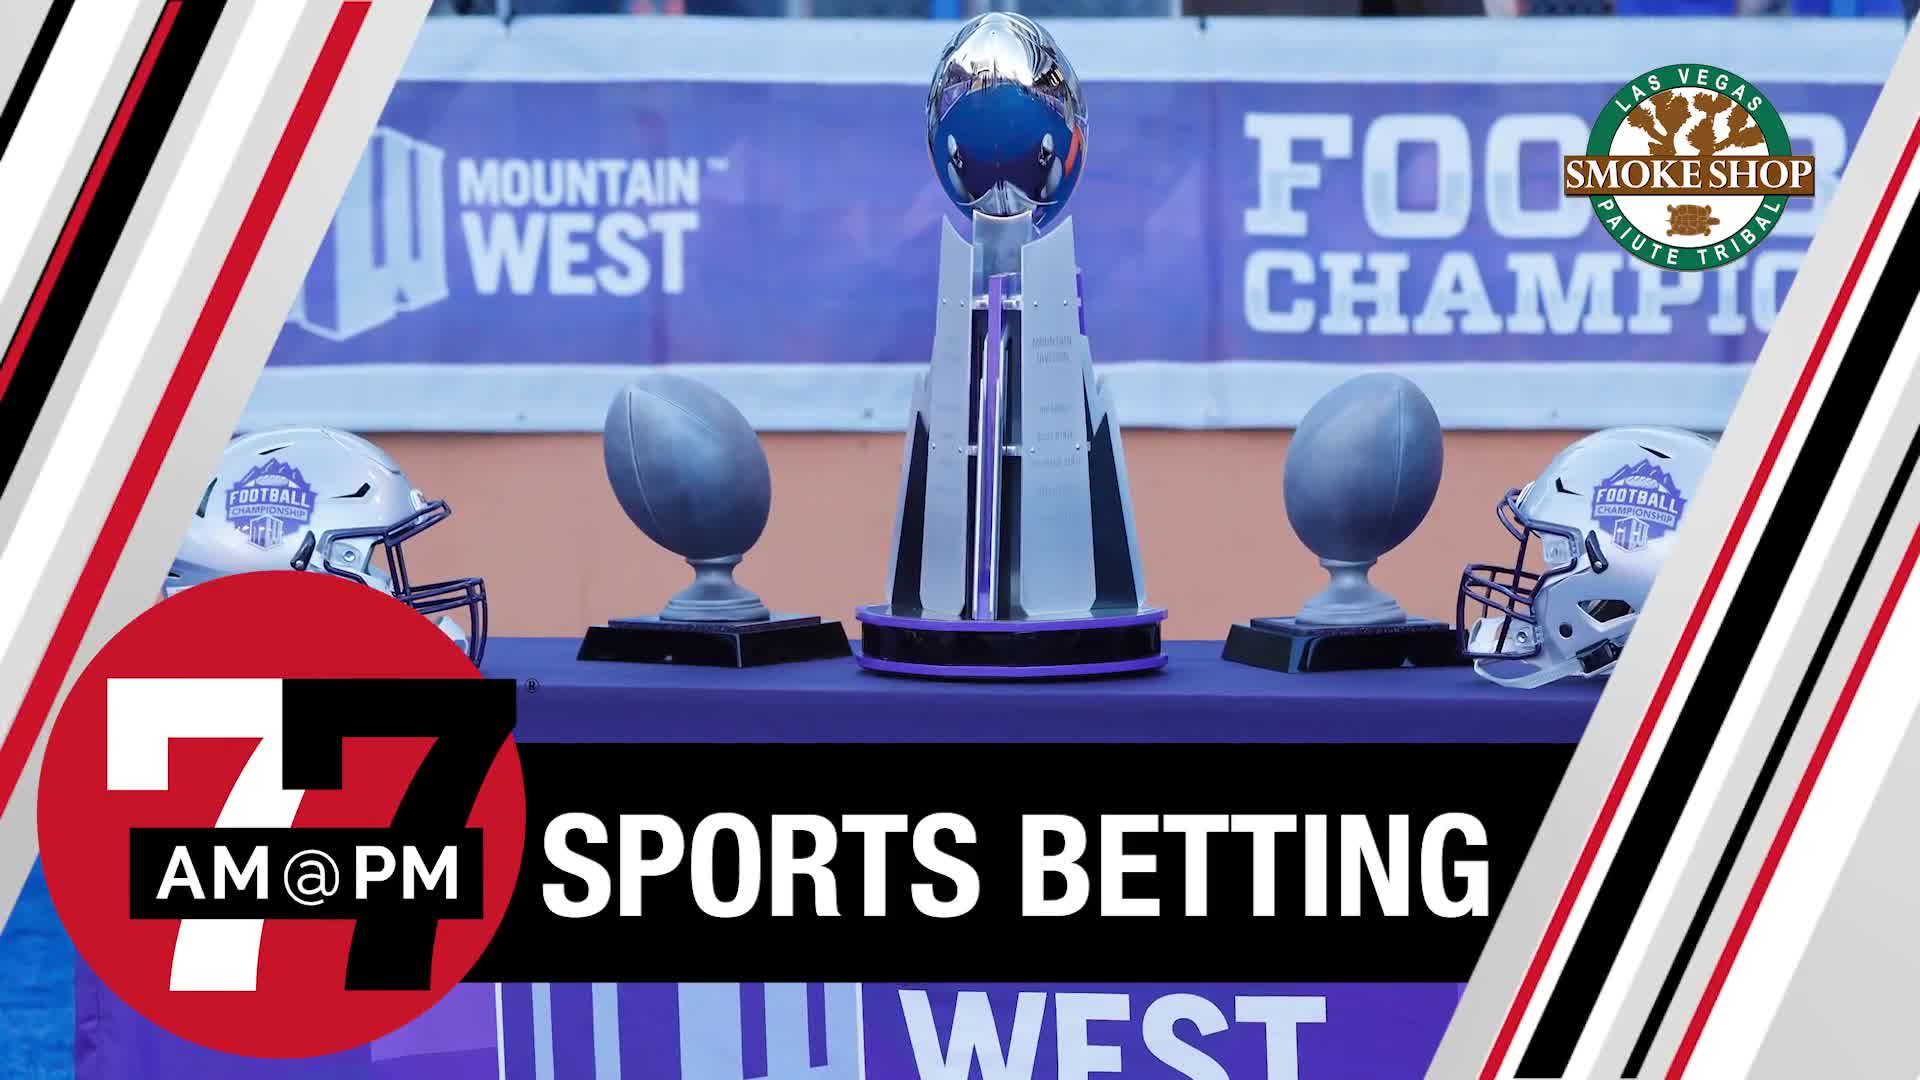 Mountain West odds at Westgate SuperBook